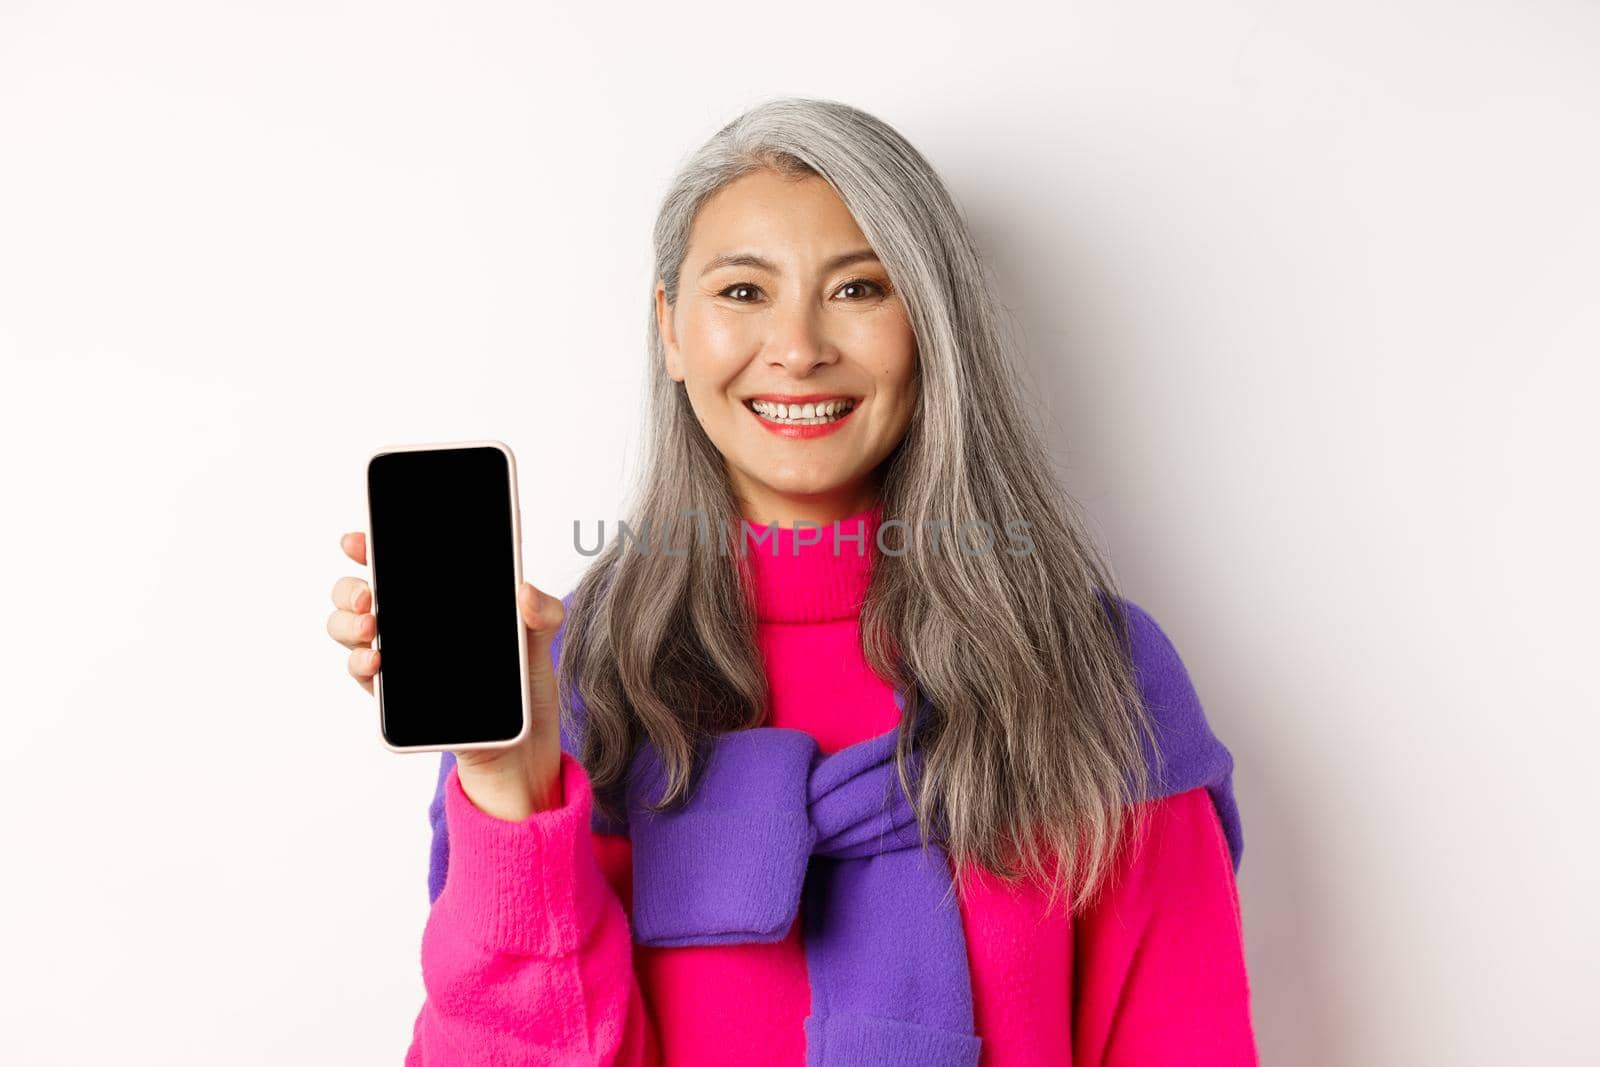 Online shopping. Close-up of smiling asian grandmother showing blank smartphone screen, recommending promotion, standing over white background.